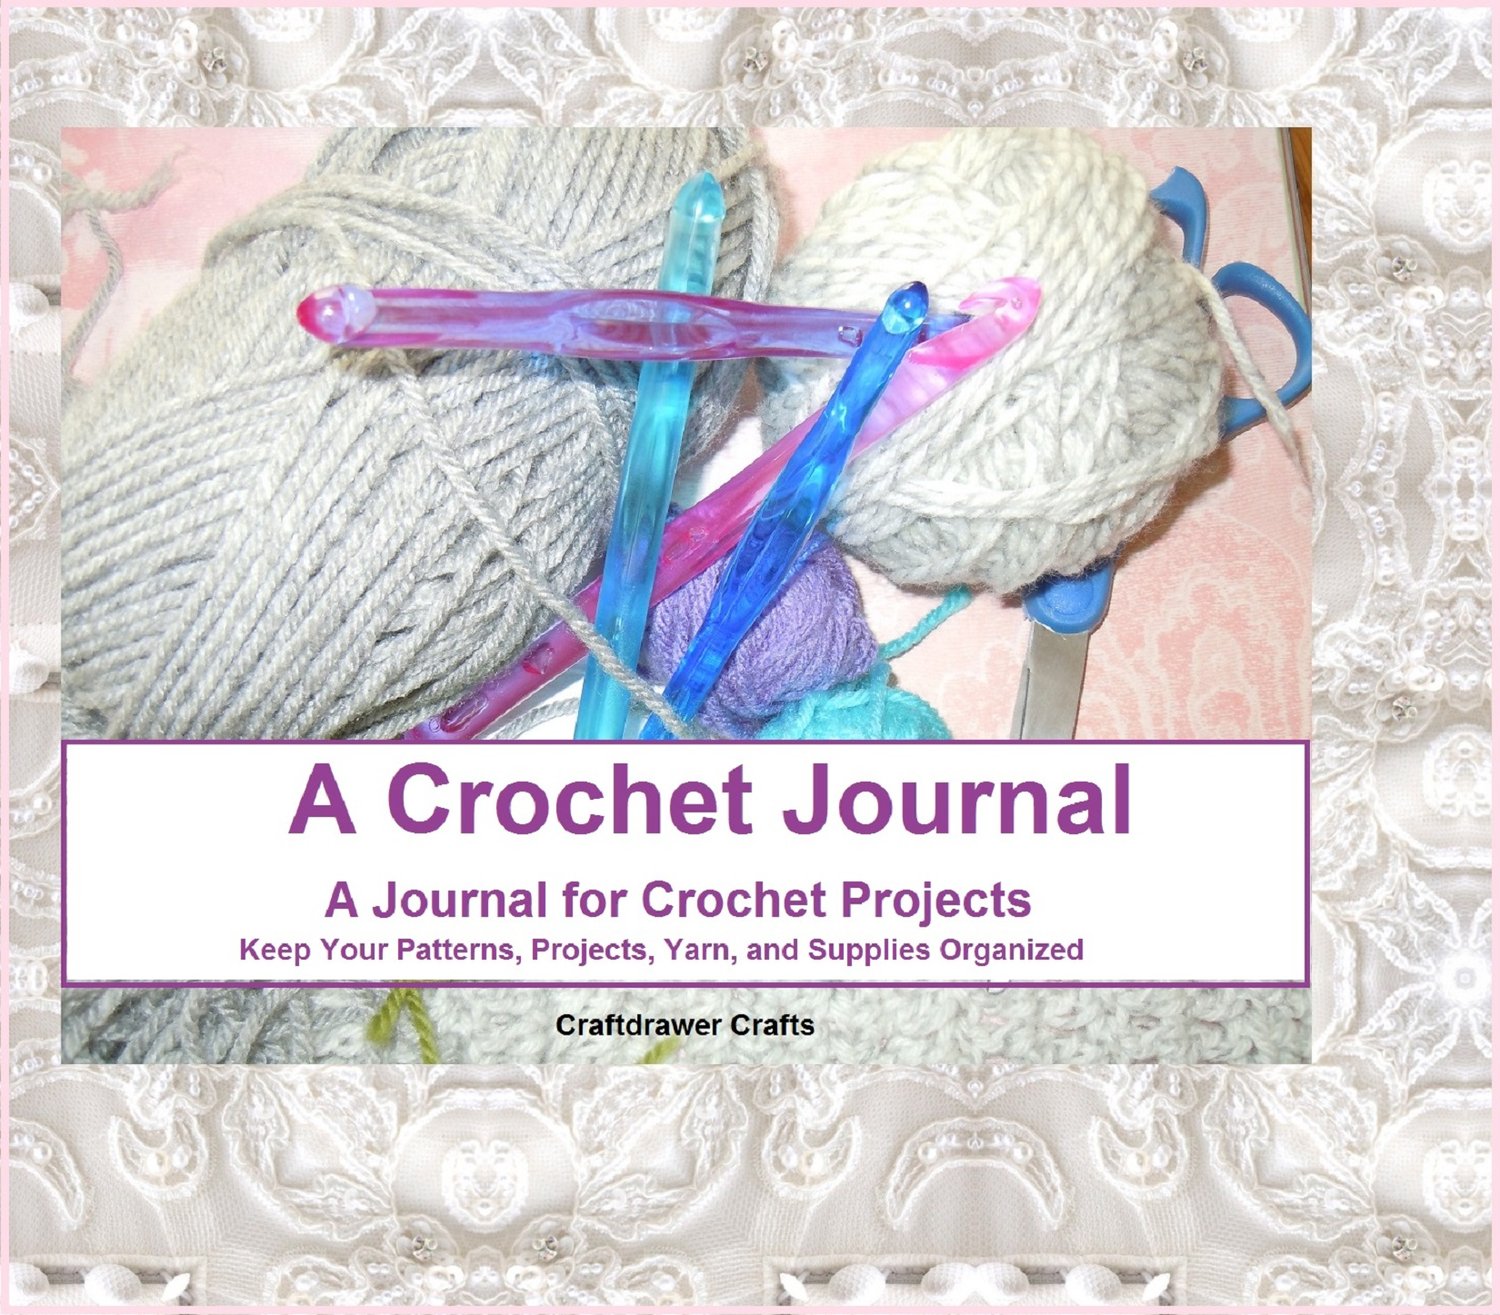 A Crochet Journal - Keep Track of Your Crochet Projects - Payhip